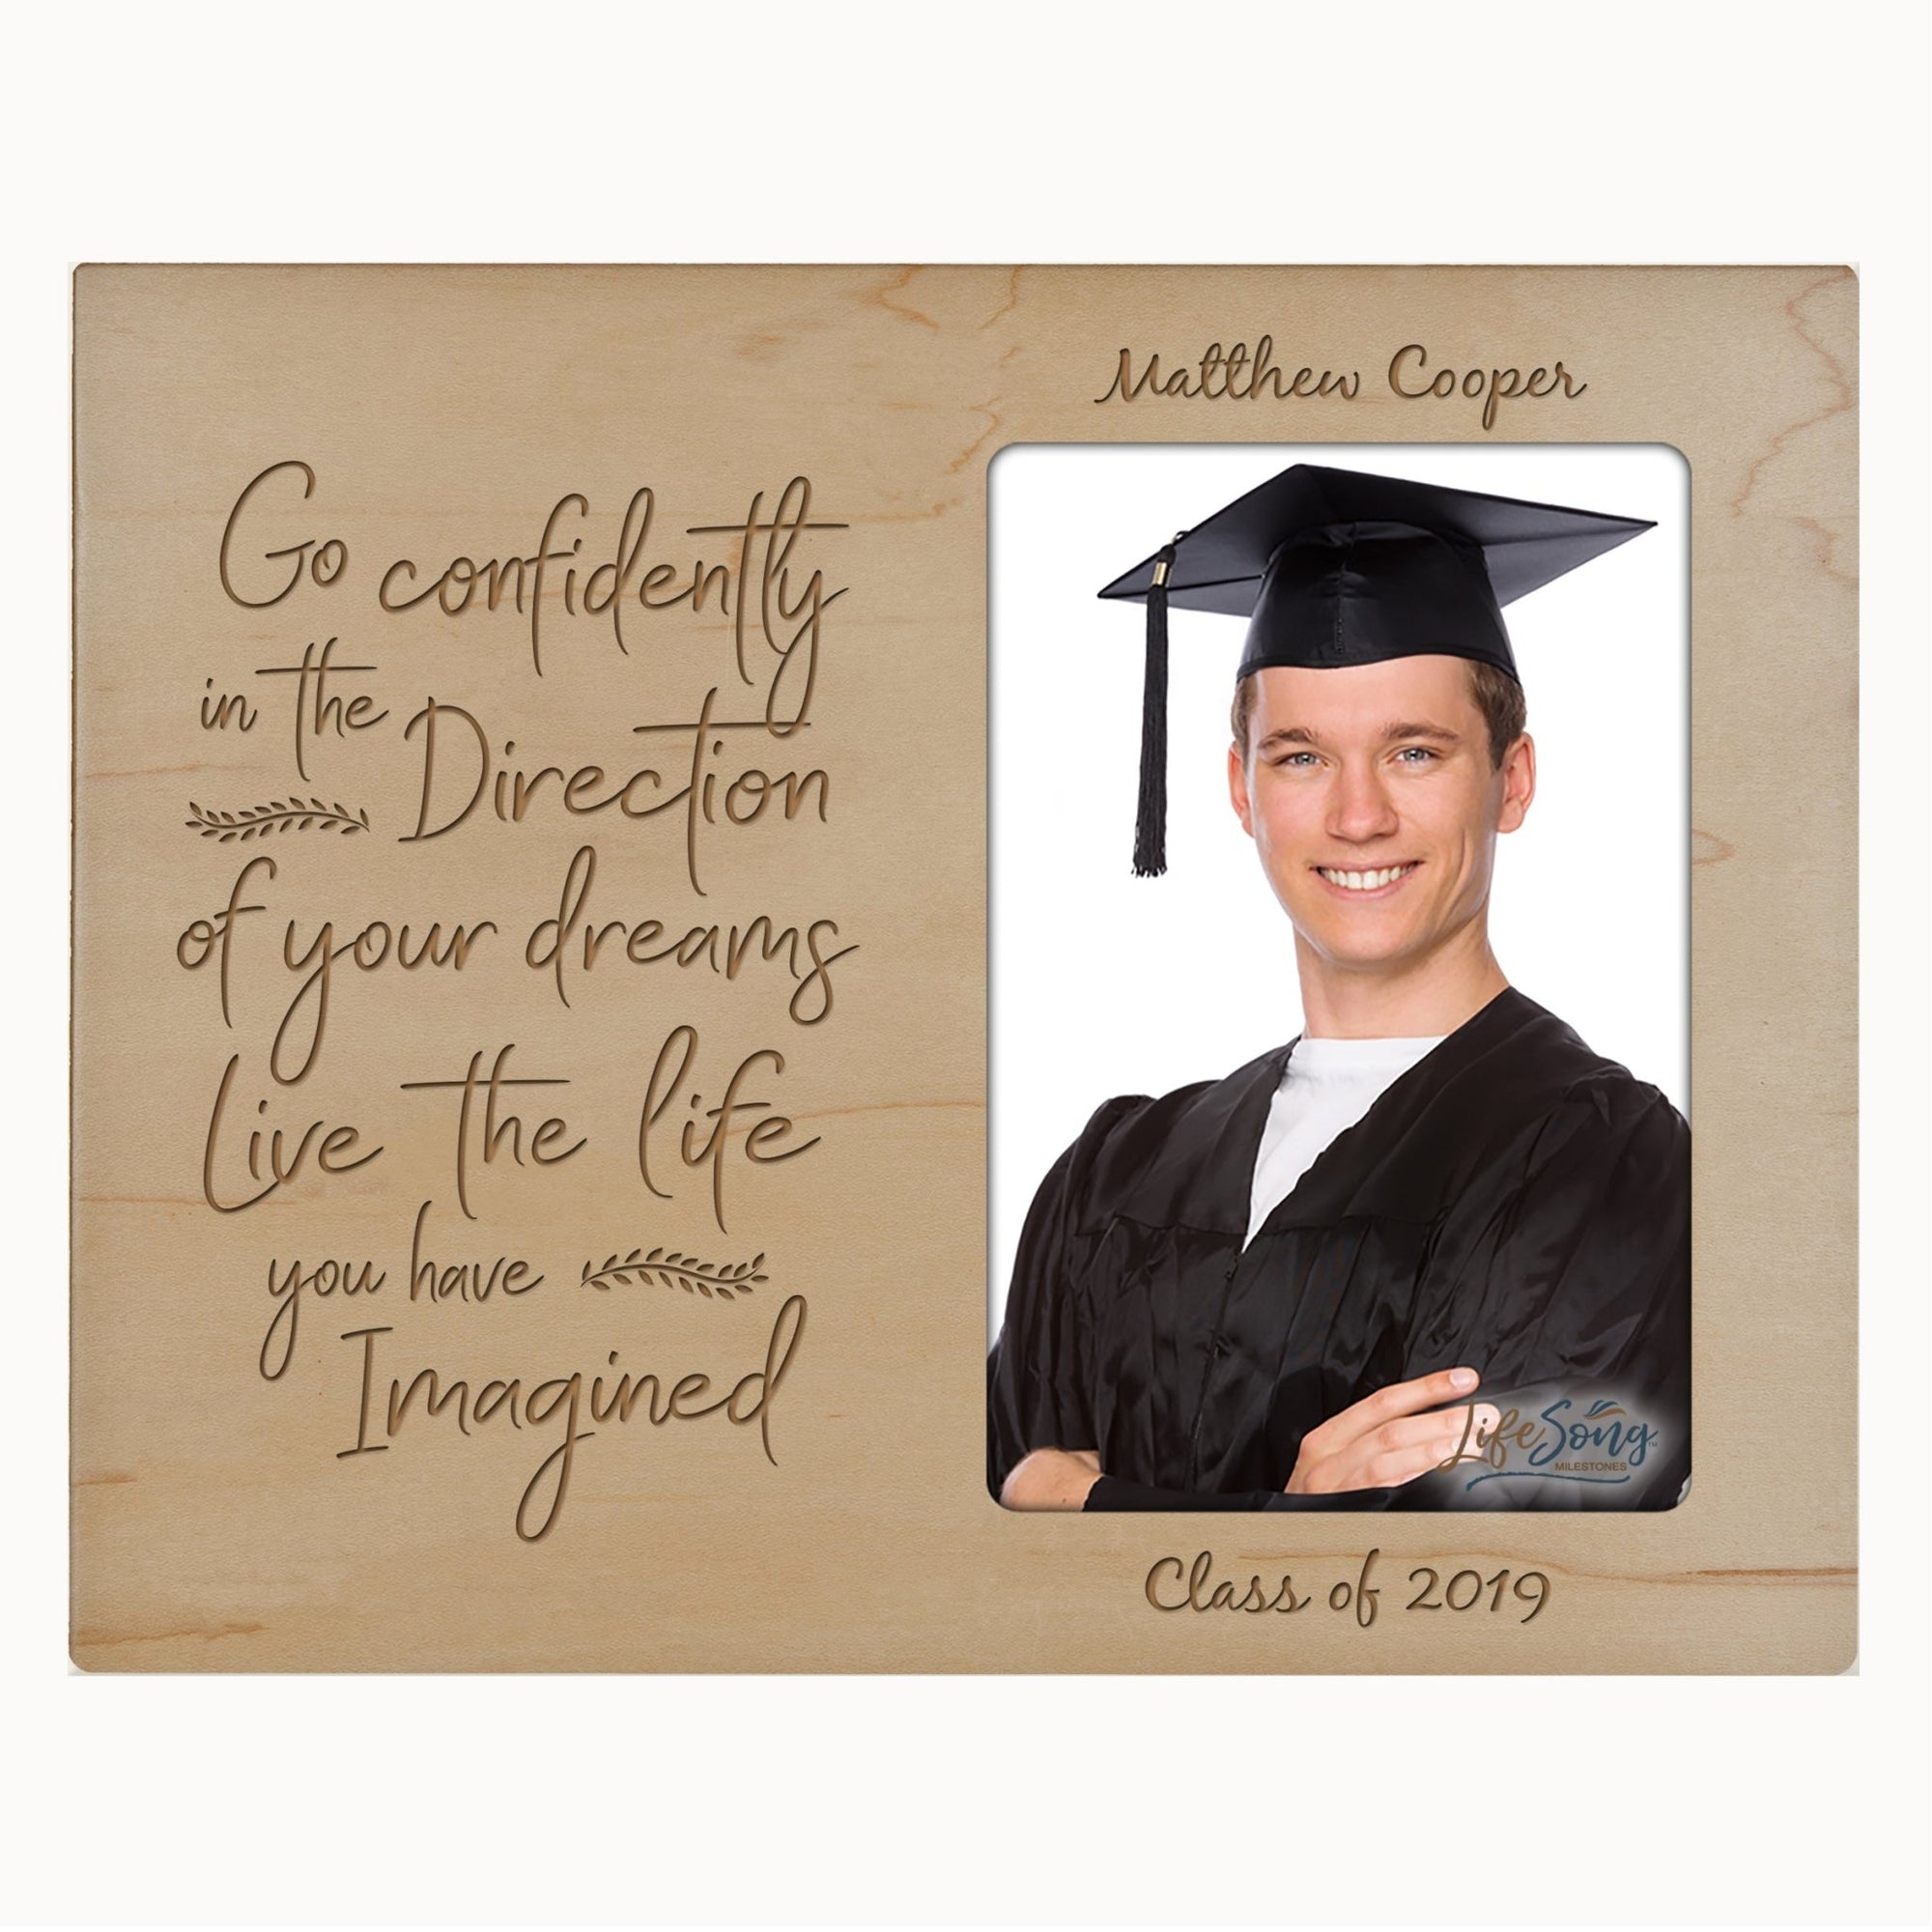 Personalized 8x10 Graduation Vertical Photo Frame Gift -Go Confidently - LifeSong Milestones